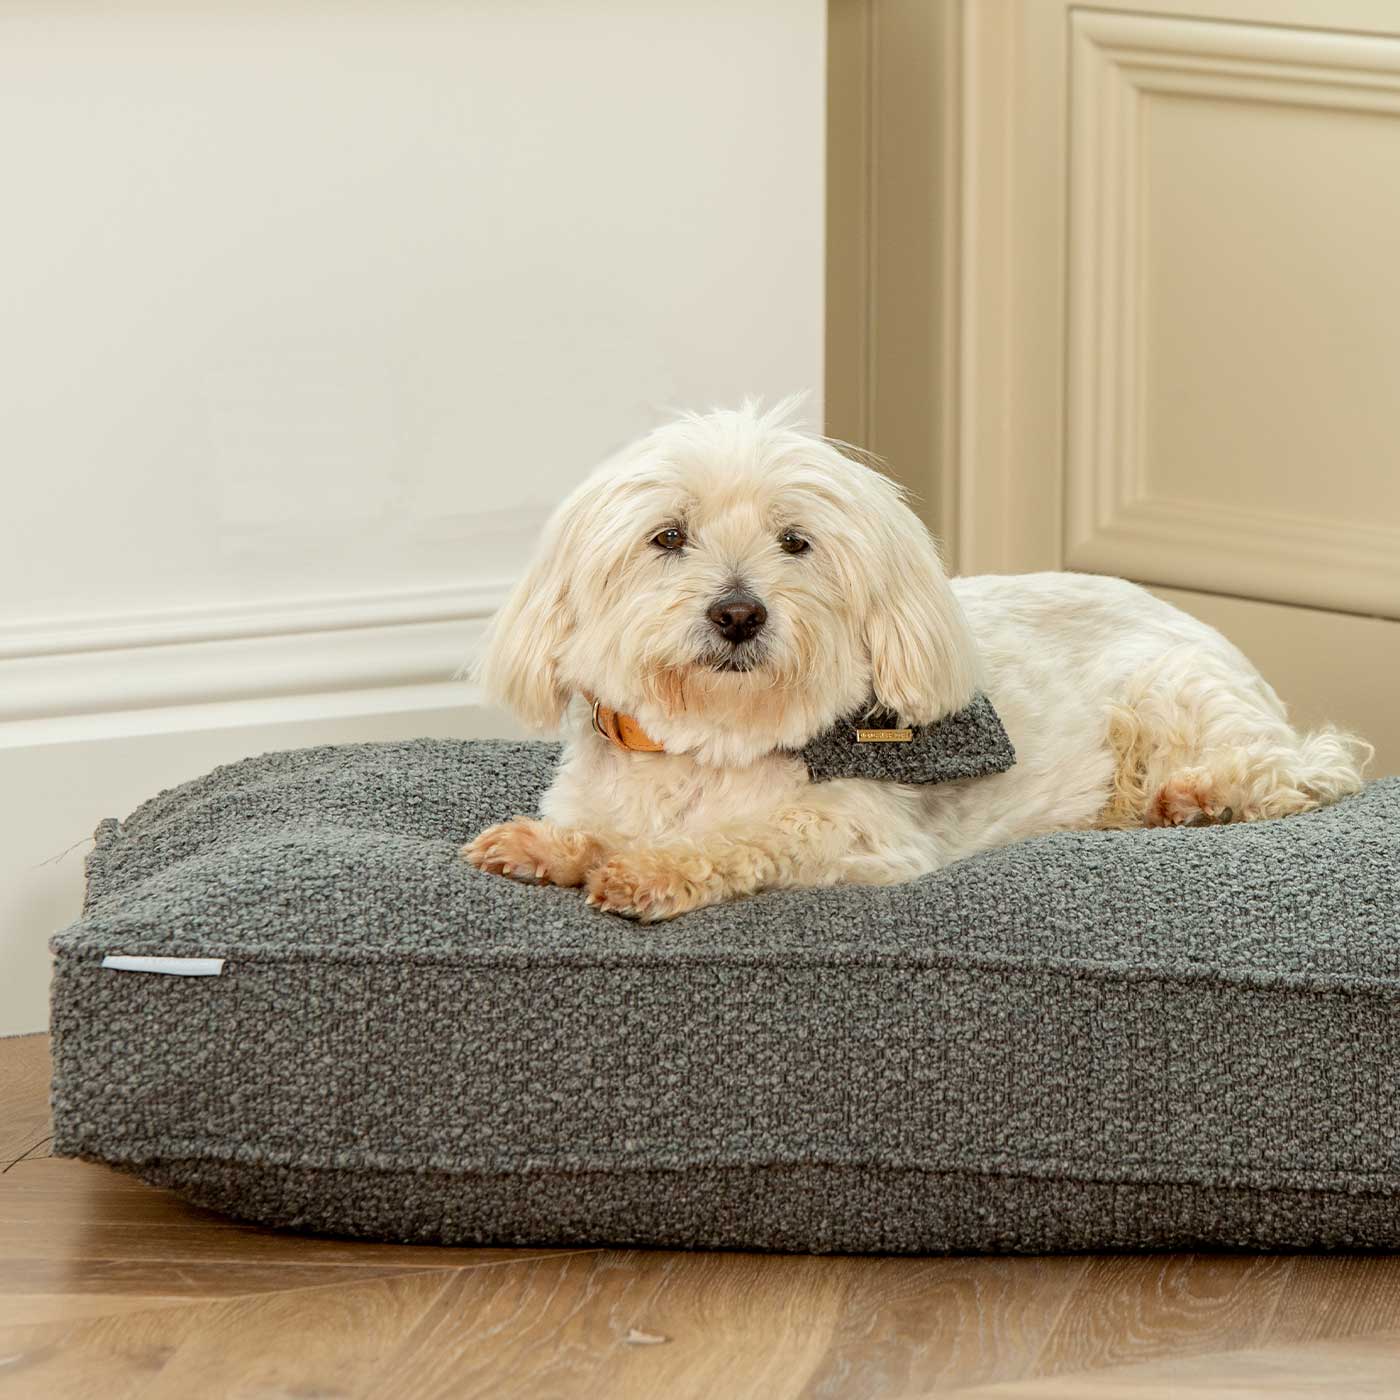 Luxury Dog Crate Cushion, Bouclé Crate Cushion Cover The Perfect Dog Crate Accessory, Available Now at Lords & Labradors